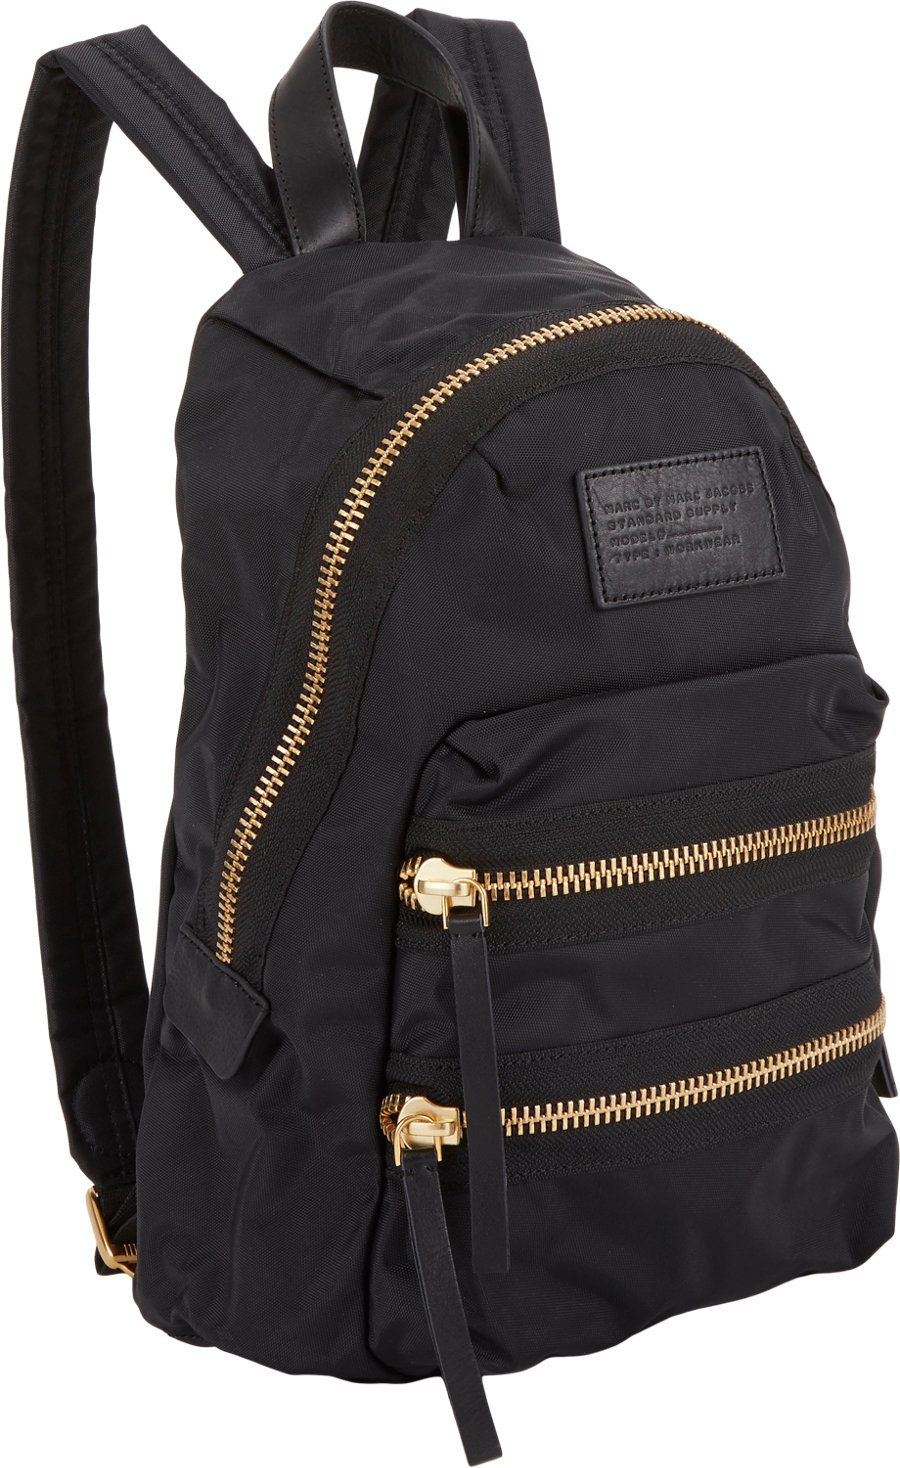 Lyst - Marc by marc jacobs Mini Domo Arigato Packrat Backpack in Black